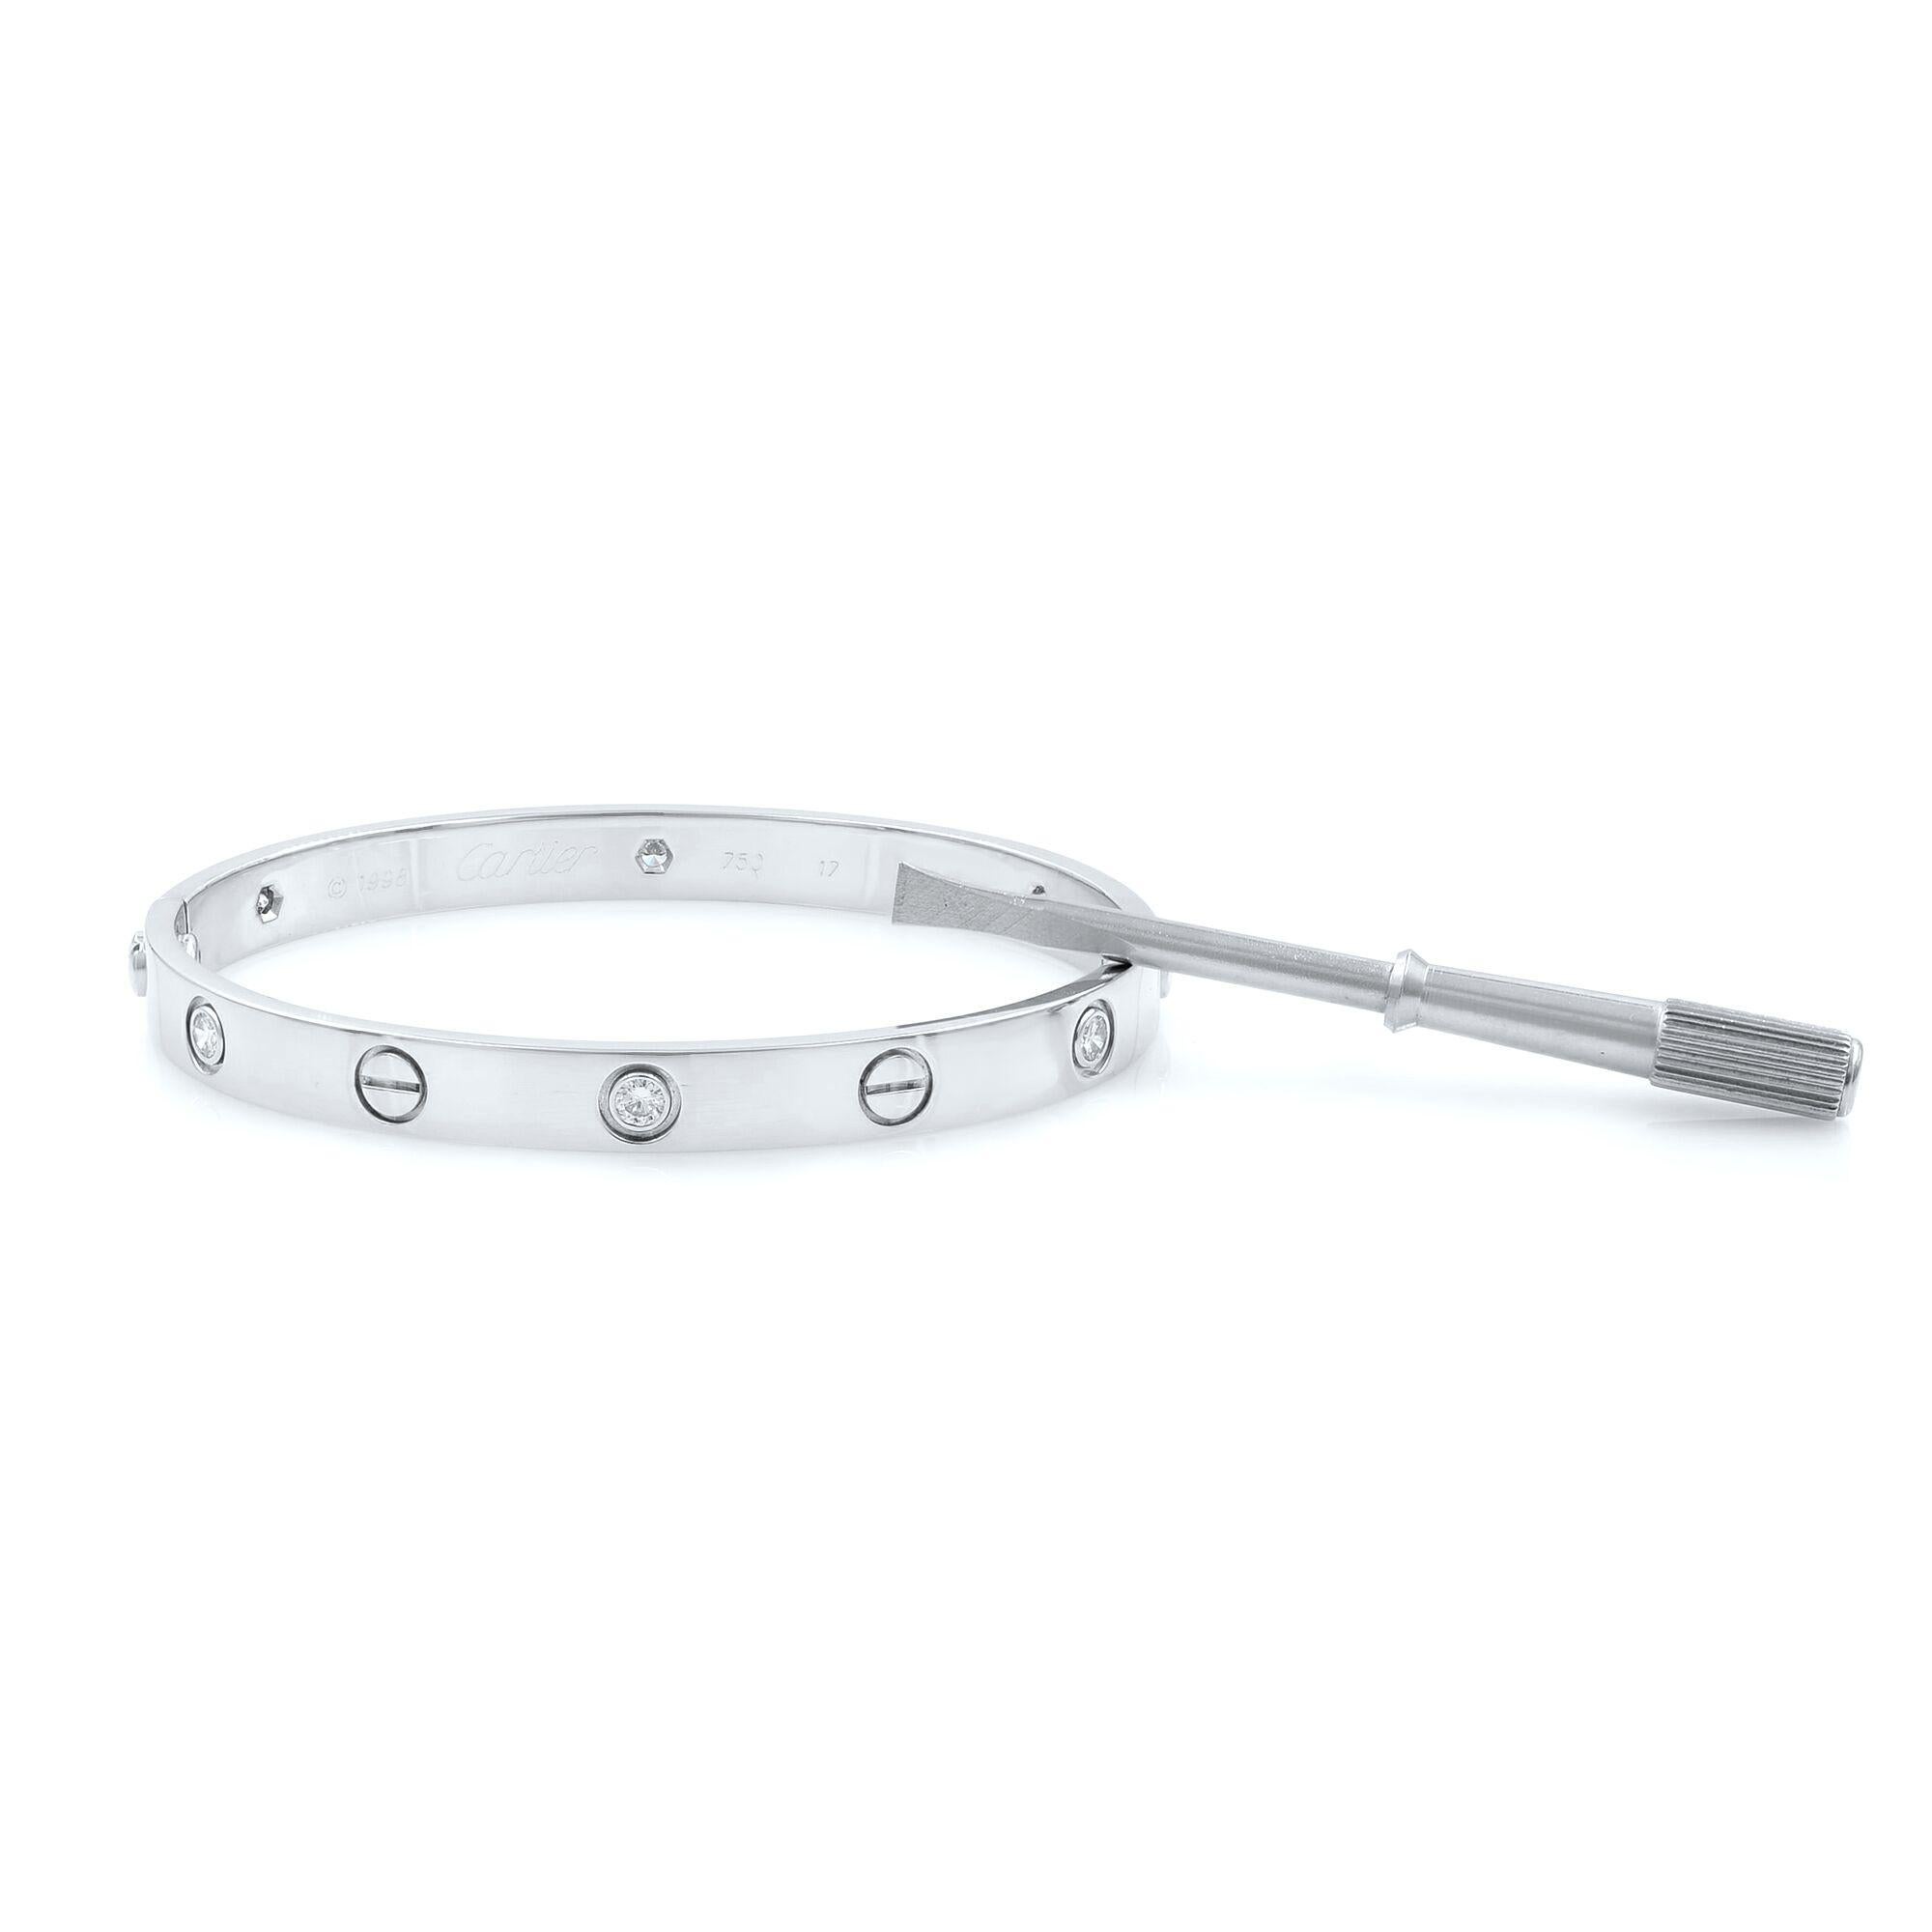 100% Authentic Carier Love Bangle bracelet with 6 diamonds, 18K white gold, Size 17.
Pre-owned, shows some little wear, in a great condition. Been polished. 
Comes with a screw driver. Box, no papers.
